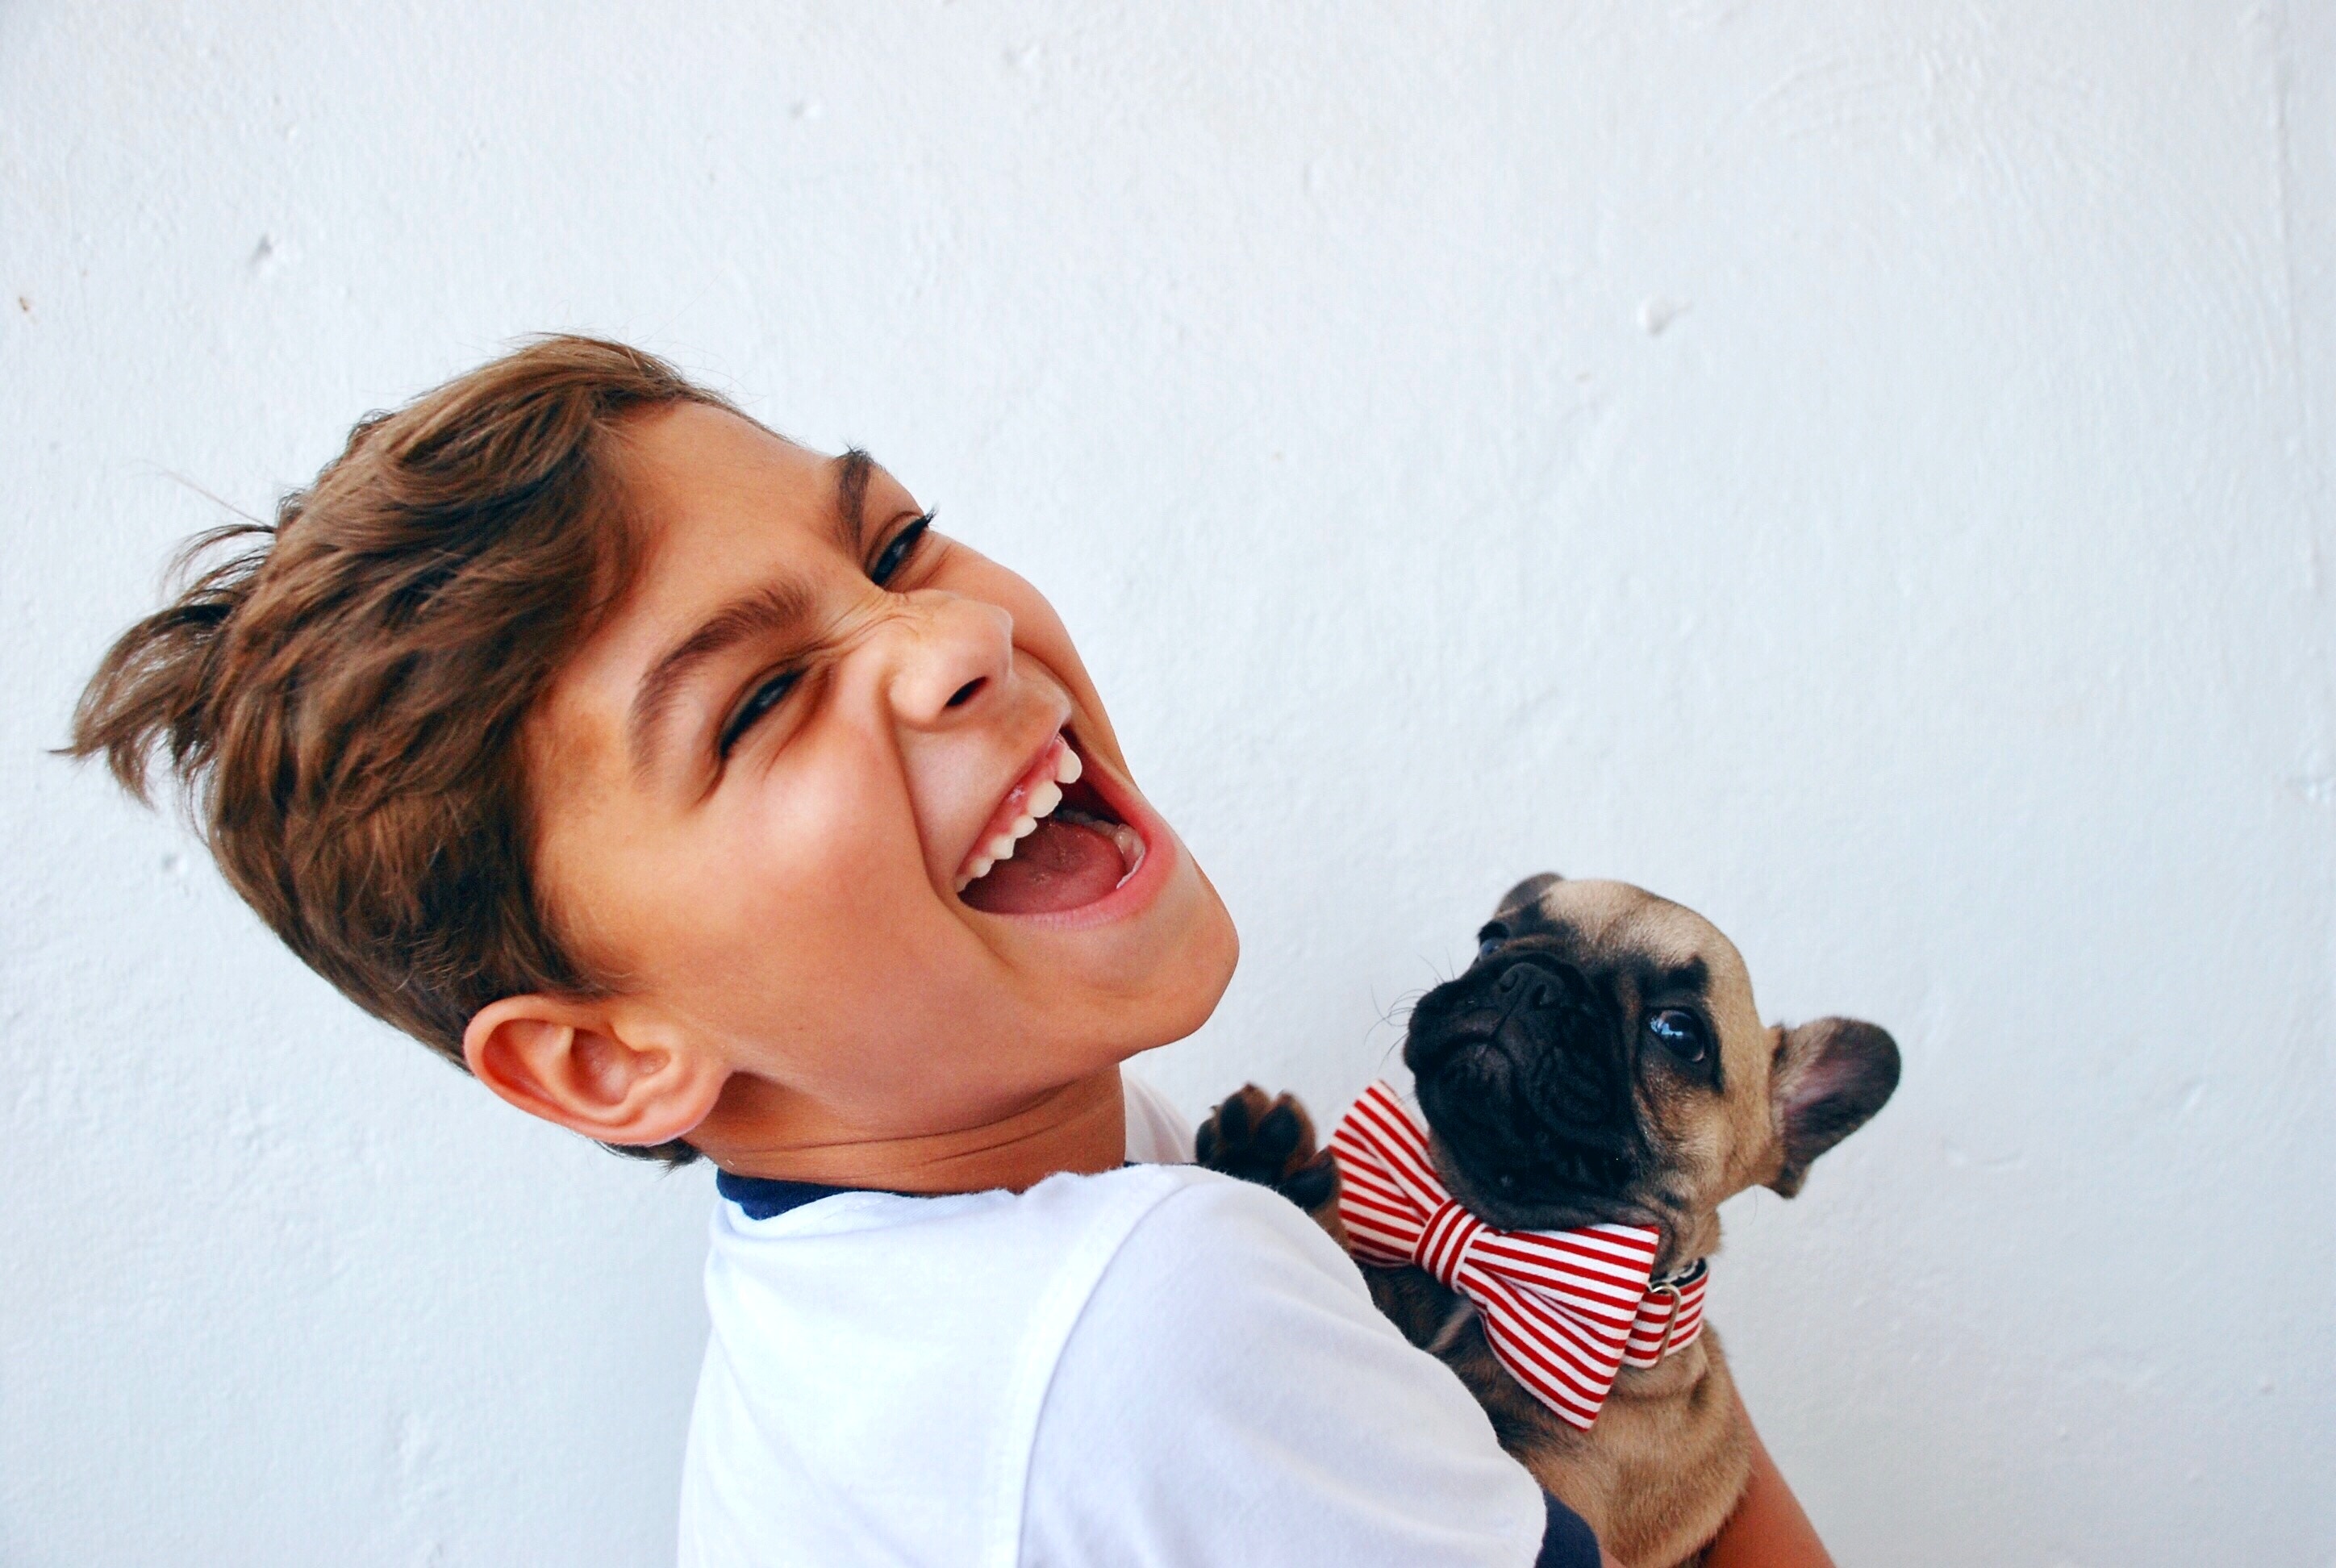 young boy in white shirt laughing with puppy wearing red bow tie